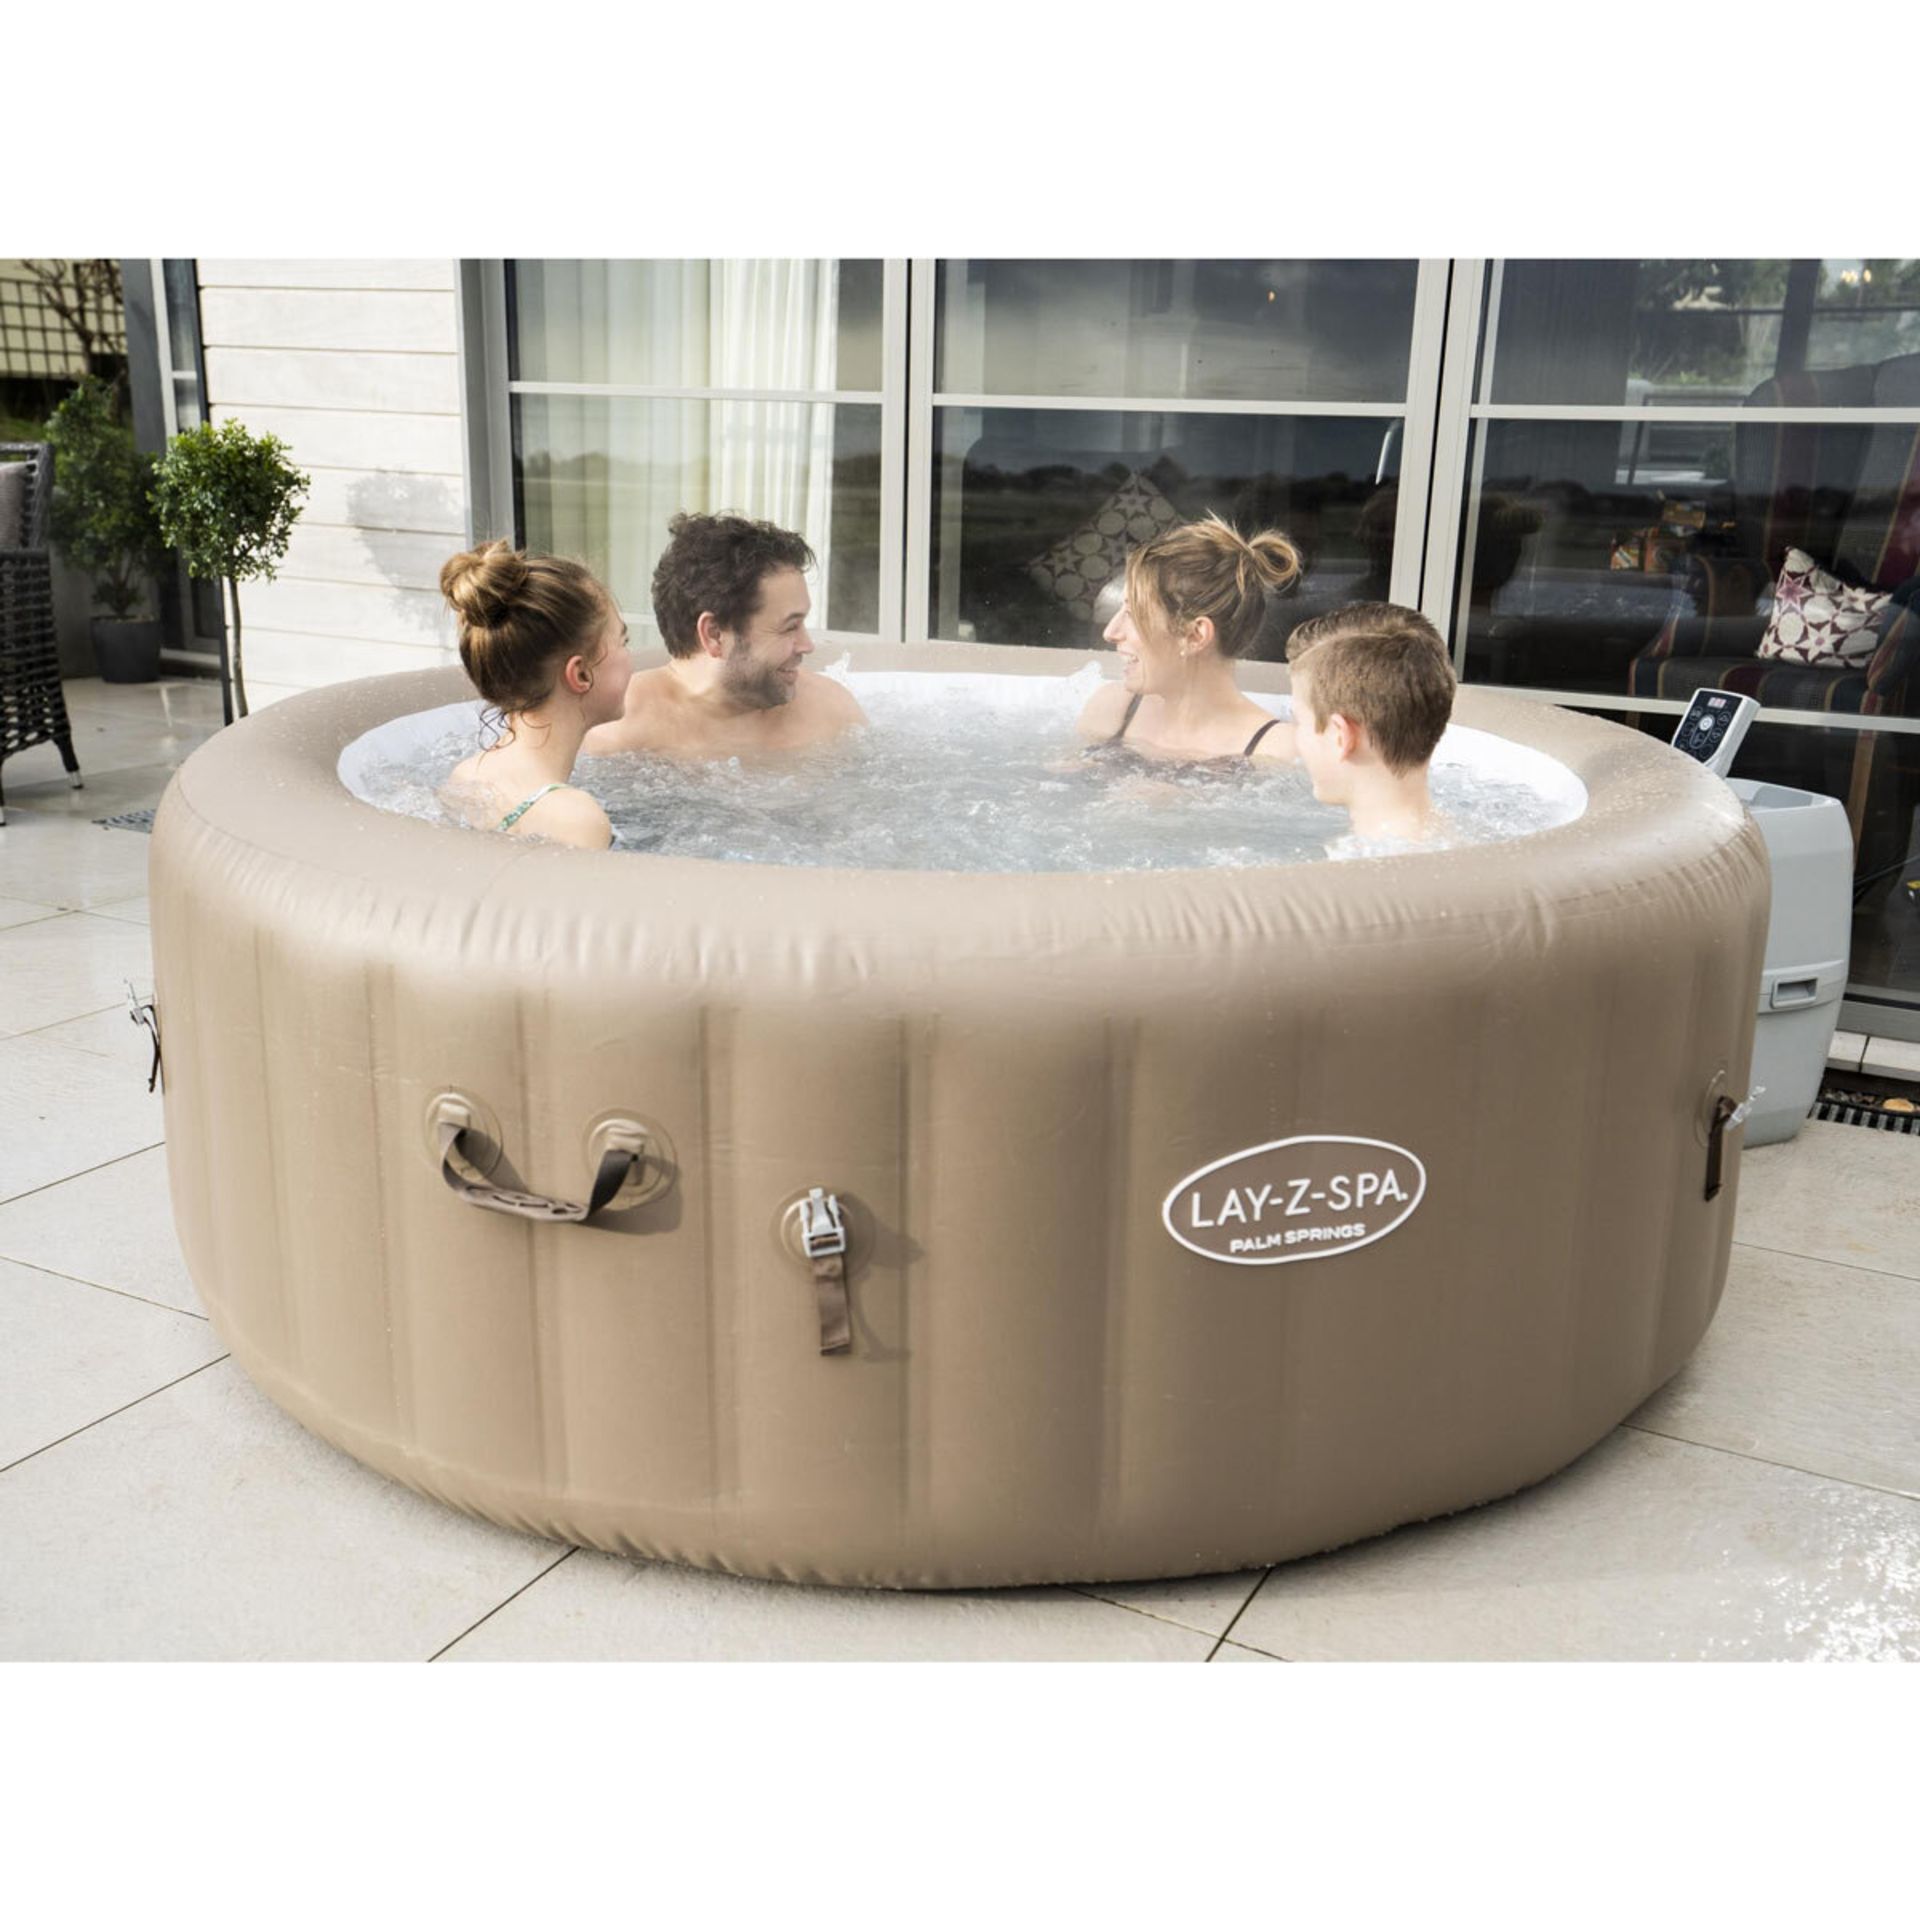 1 BOXED LAY-Z-SPA PALM SPRINGS INFLATABLE 4-6 PERSON SPA RRP Â£499 (PICTURES FOR ILLUSTRATION